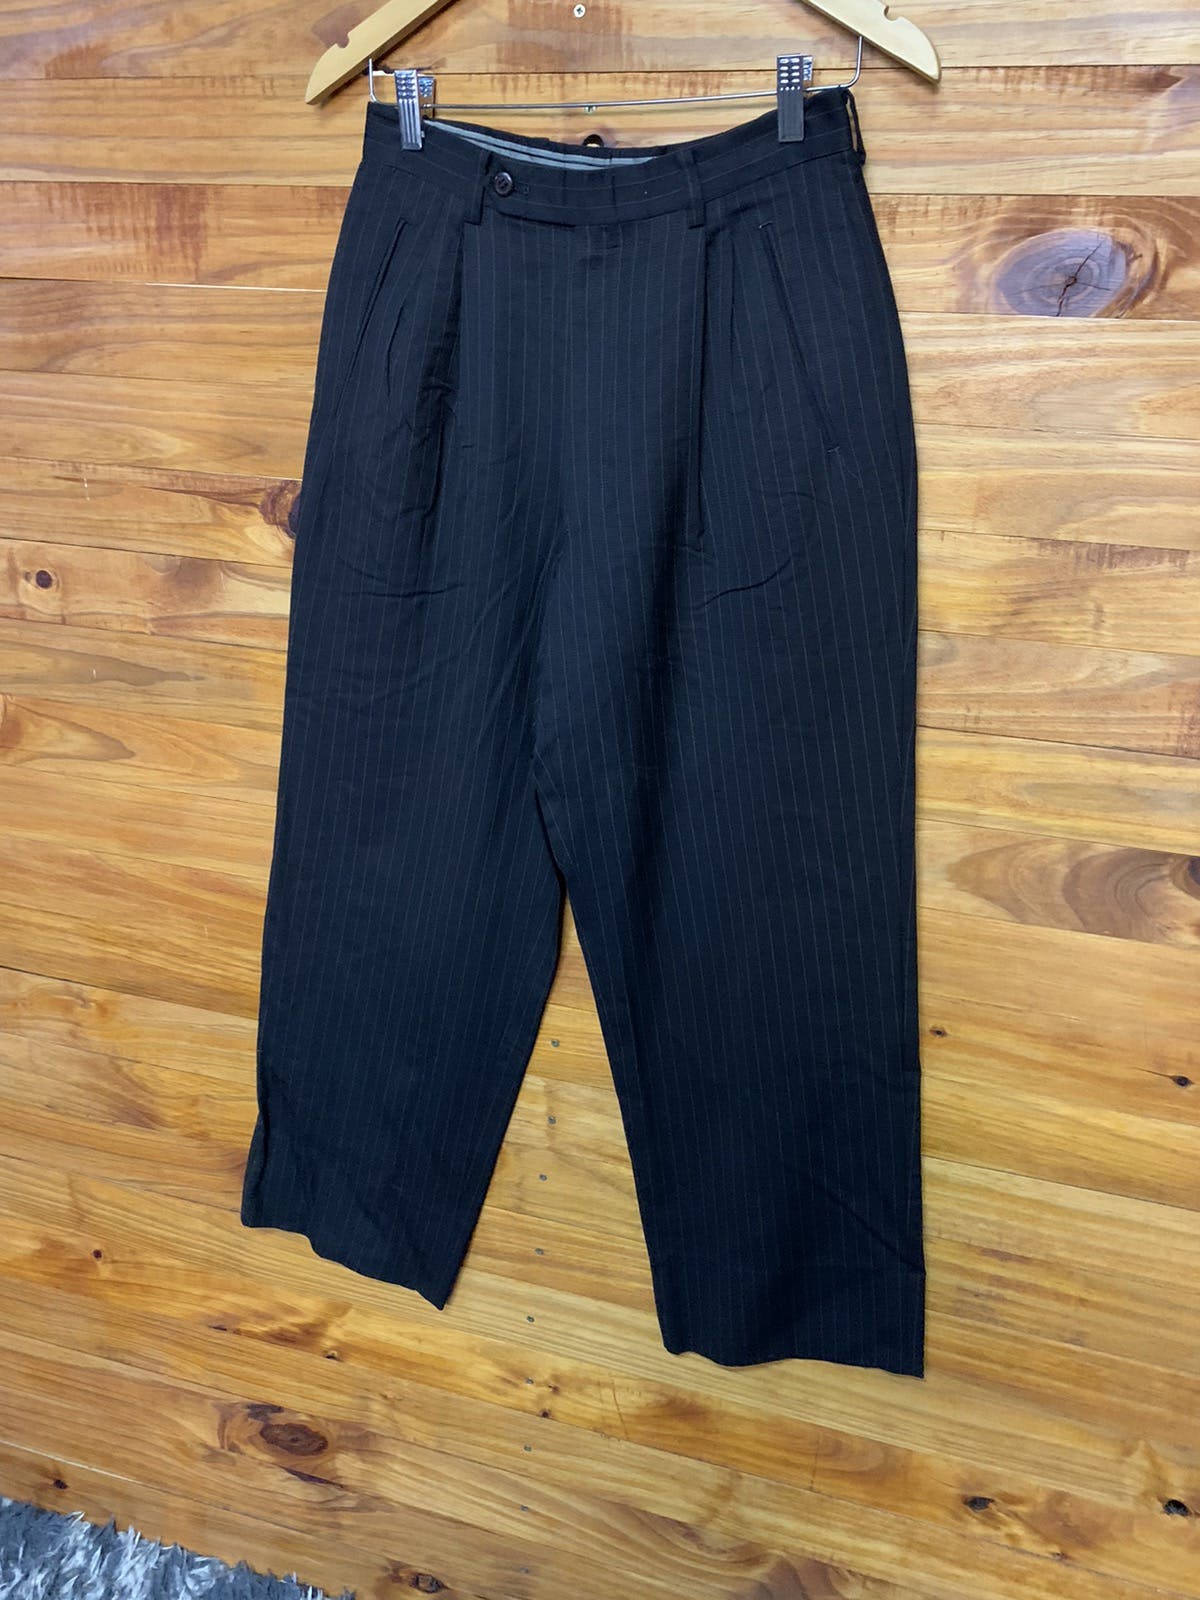 Vintage Moschino Trouser Pants - 2